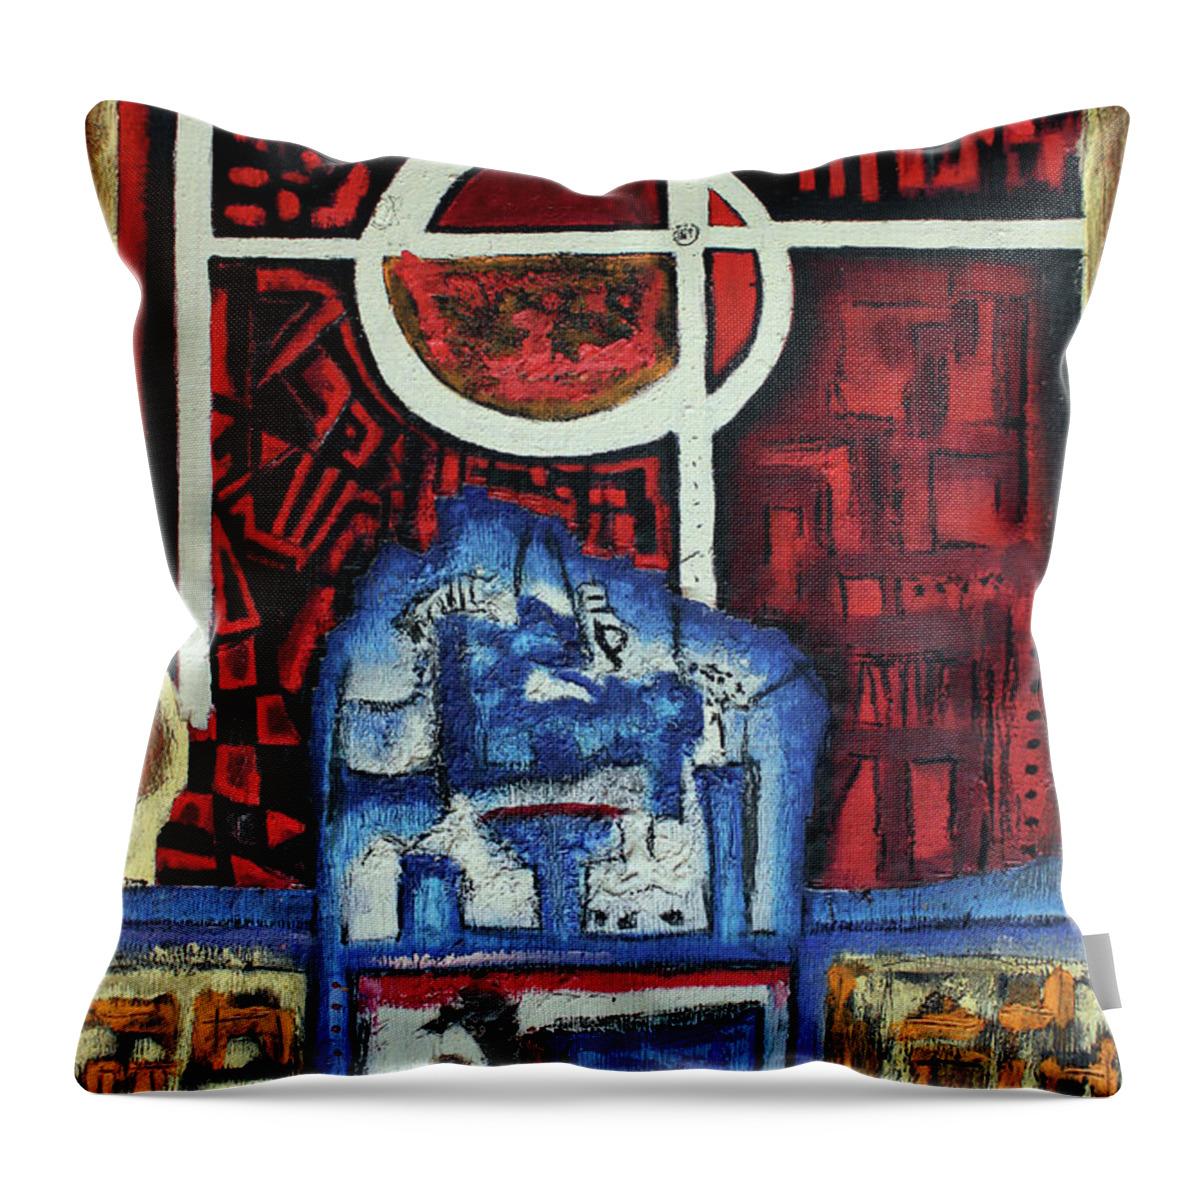 African Art Throw Pillow featuring the painting The Target Is I by Michael Nene